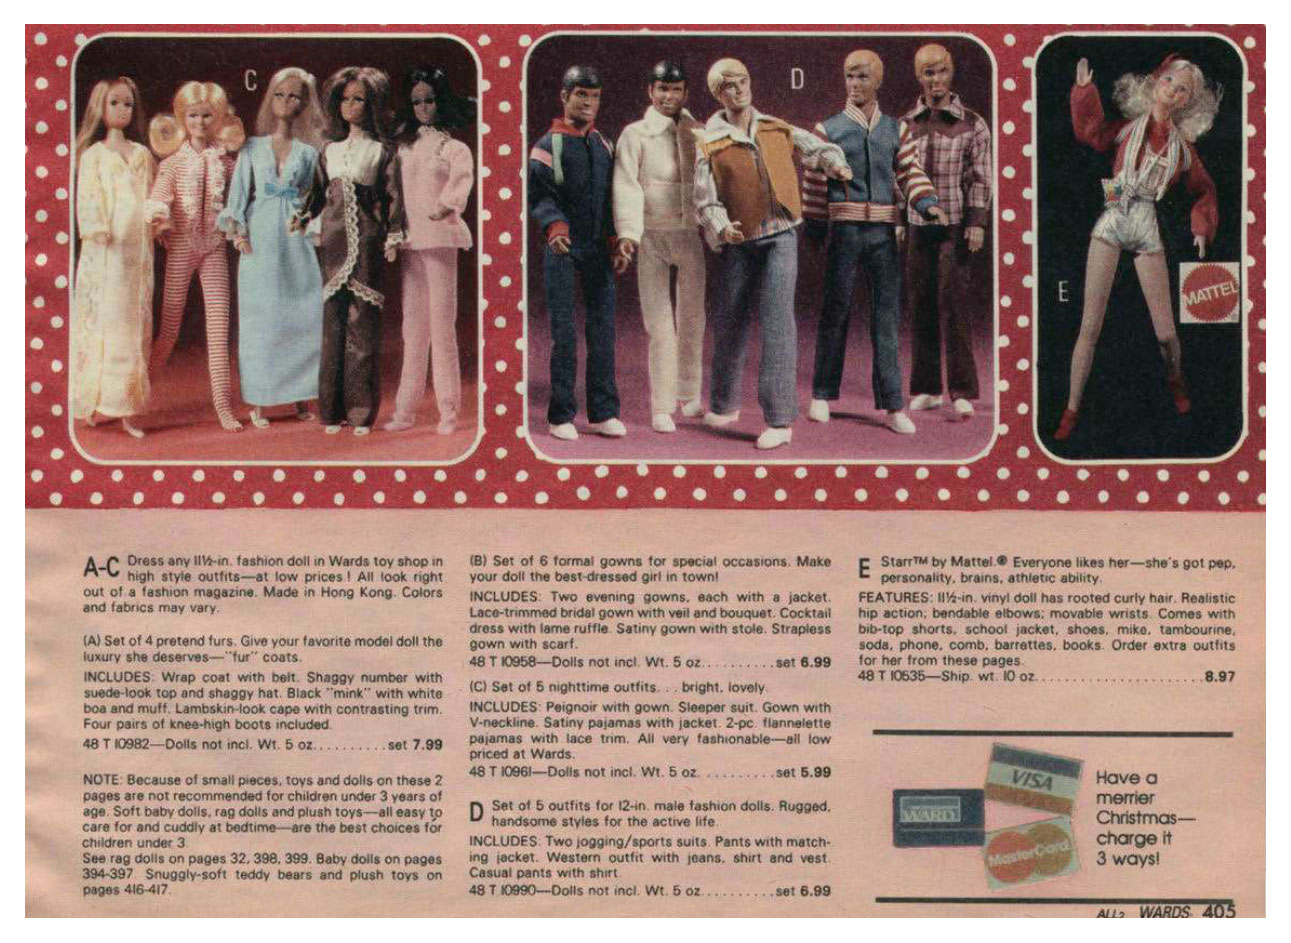 From 1981 Montgomery Ward Christmas catalogue